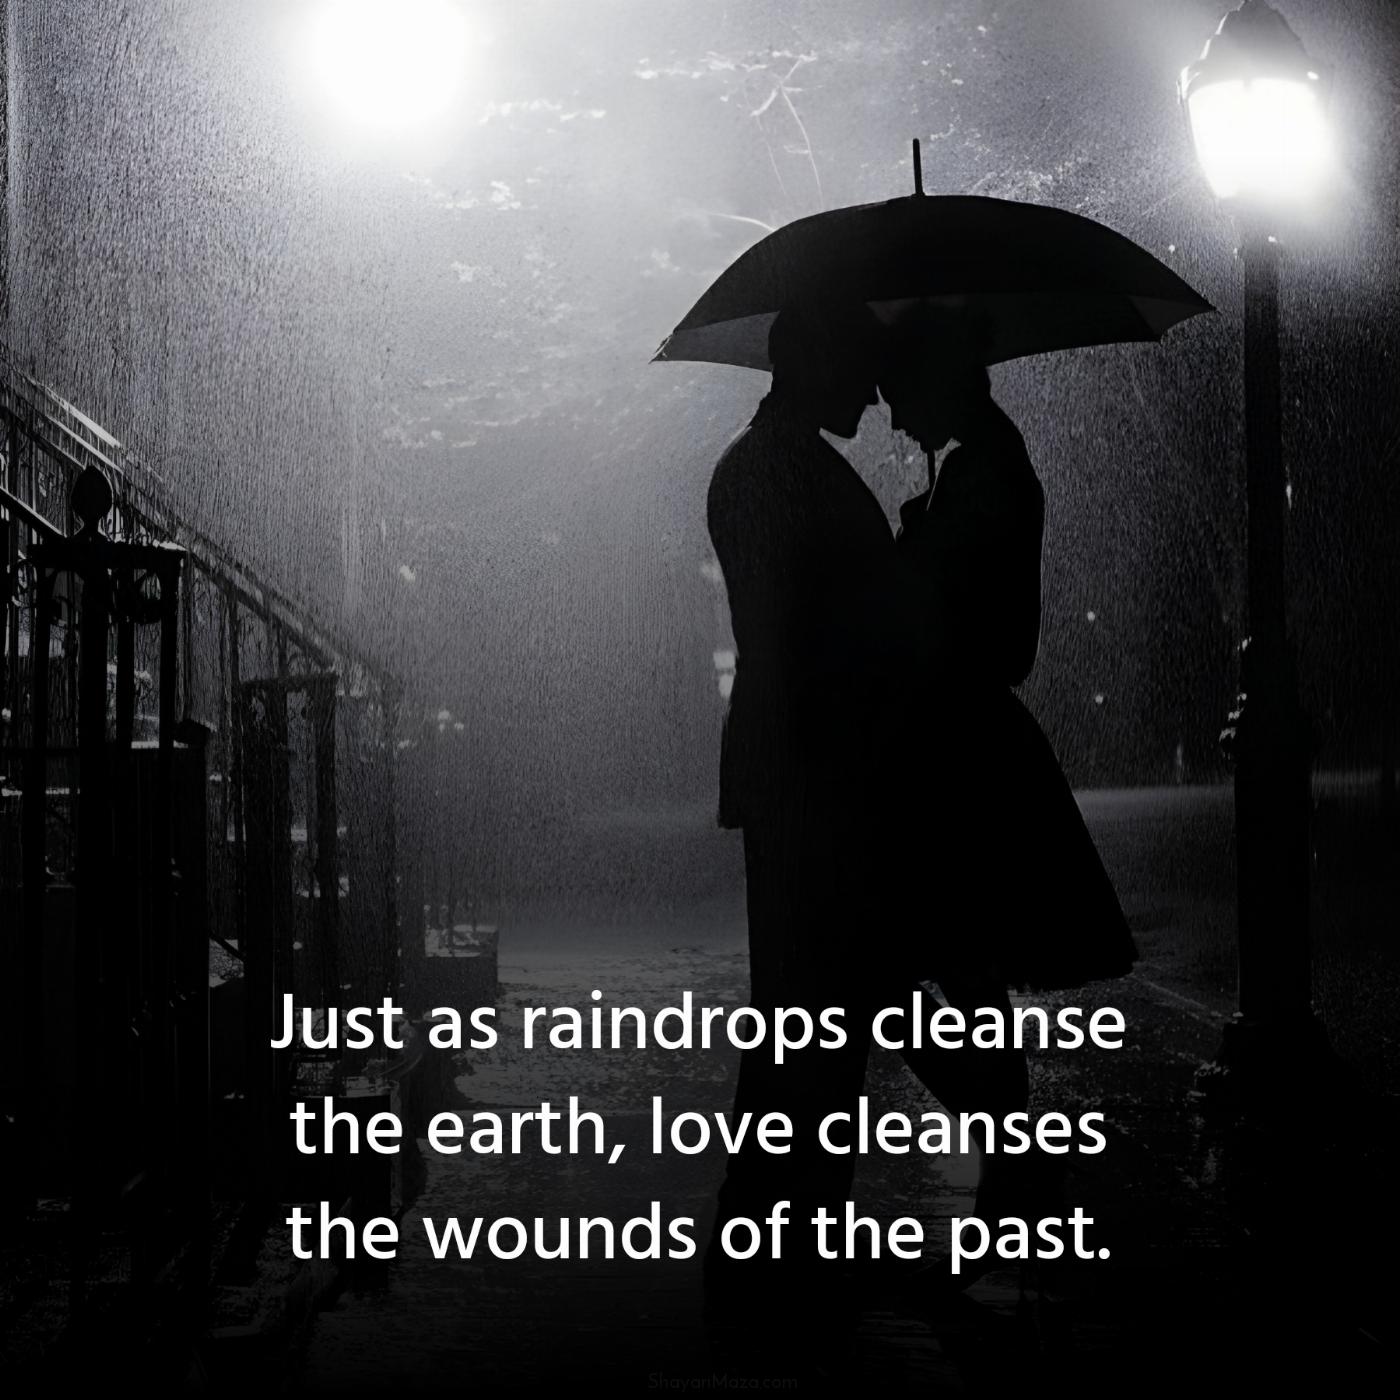 Just as raindrops cleanse the earth love cleanses the wounds